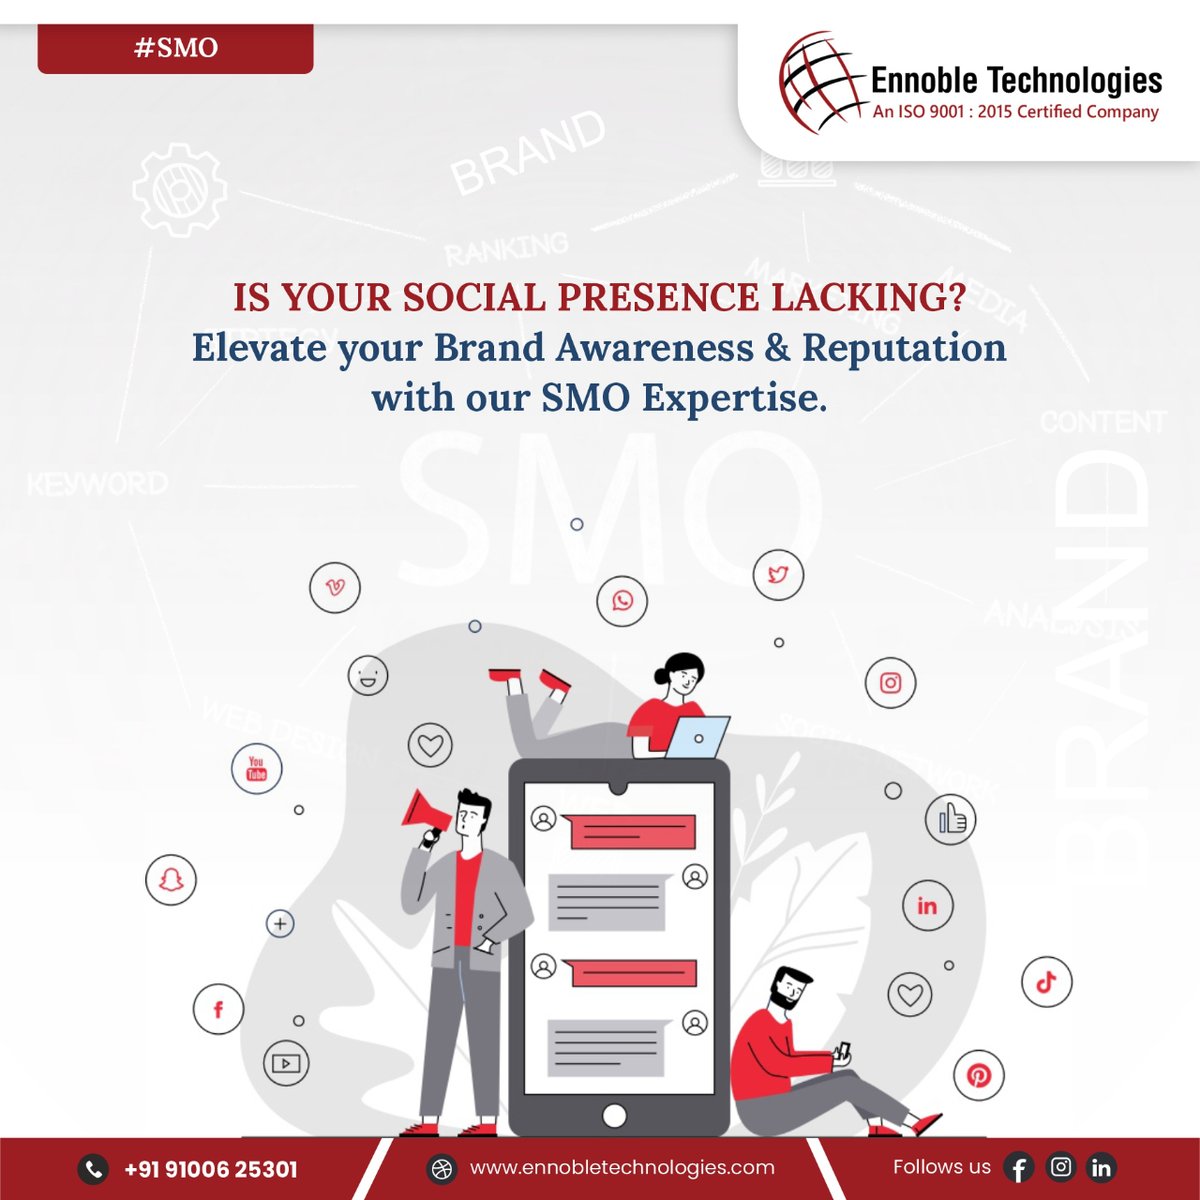 📲Is your social presence lacking?🪫

🚀Elevate your #brandAwareness and reputation with our SMO expertise. Harness the power of social media with #EnnobleTechnologies. Partner with us for #SocialSuccess!😀

☎️Tel: +91-9100625301
📧Email us: info@ennobletechnologies.com